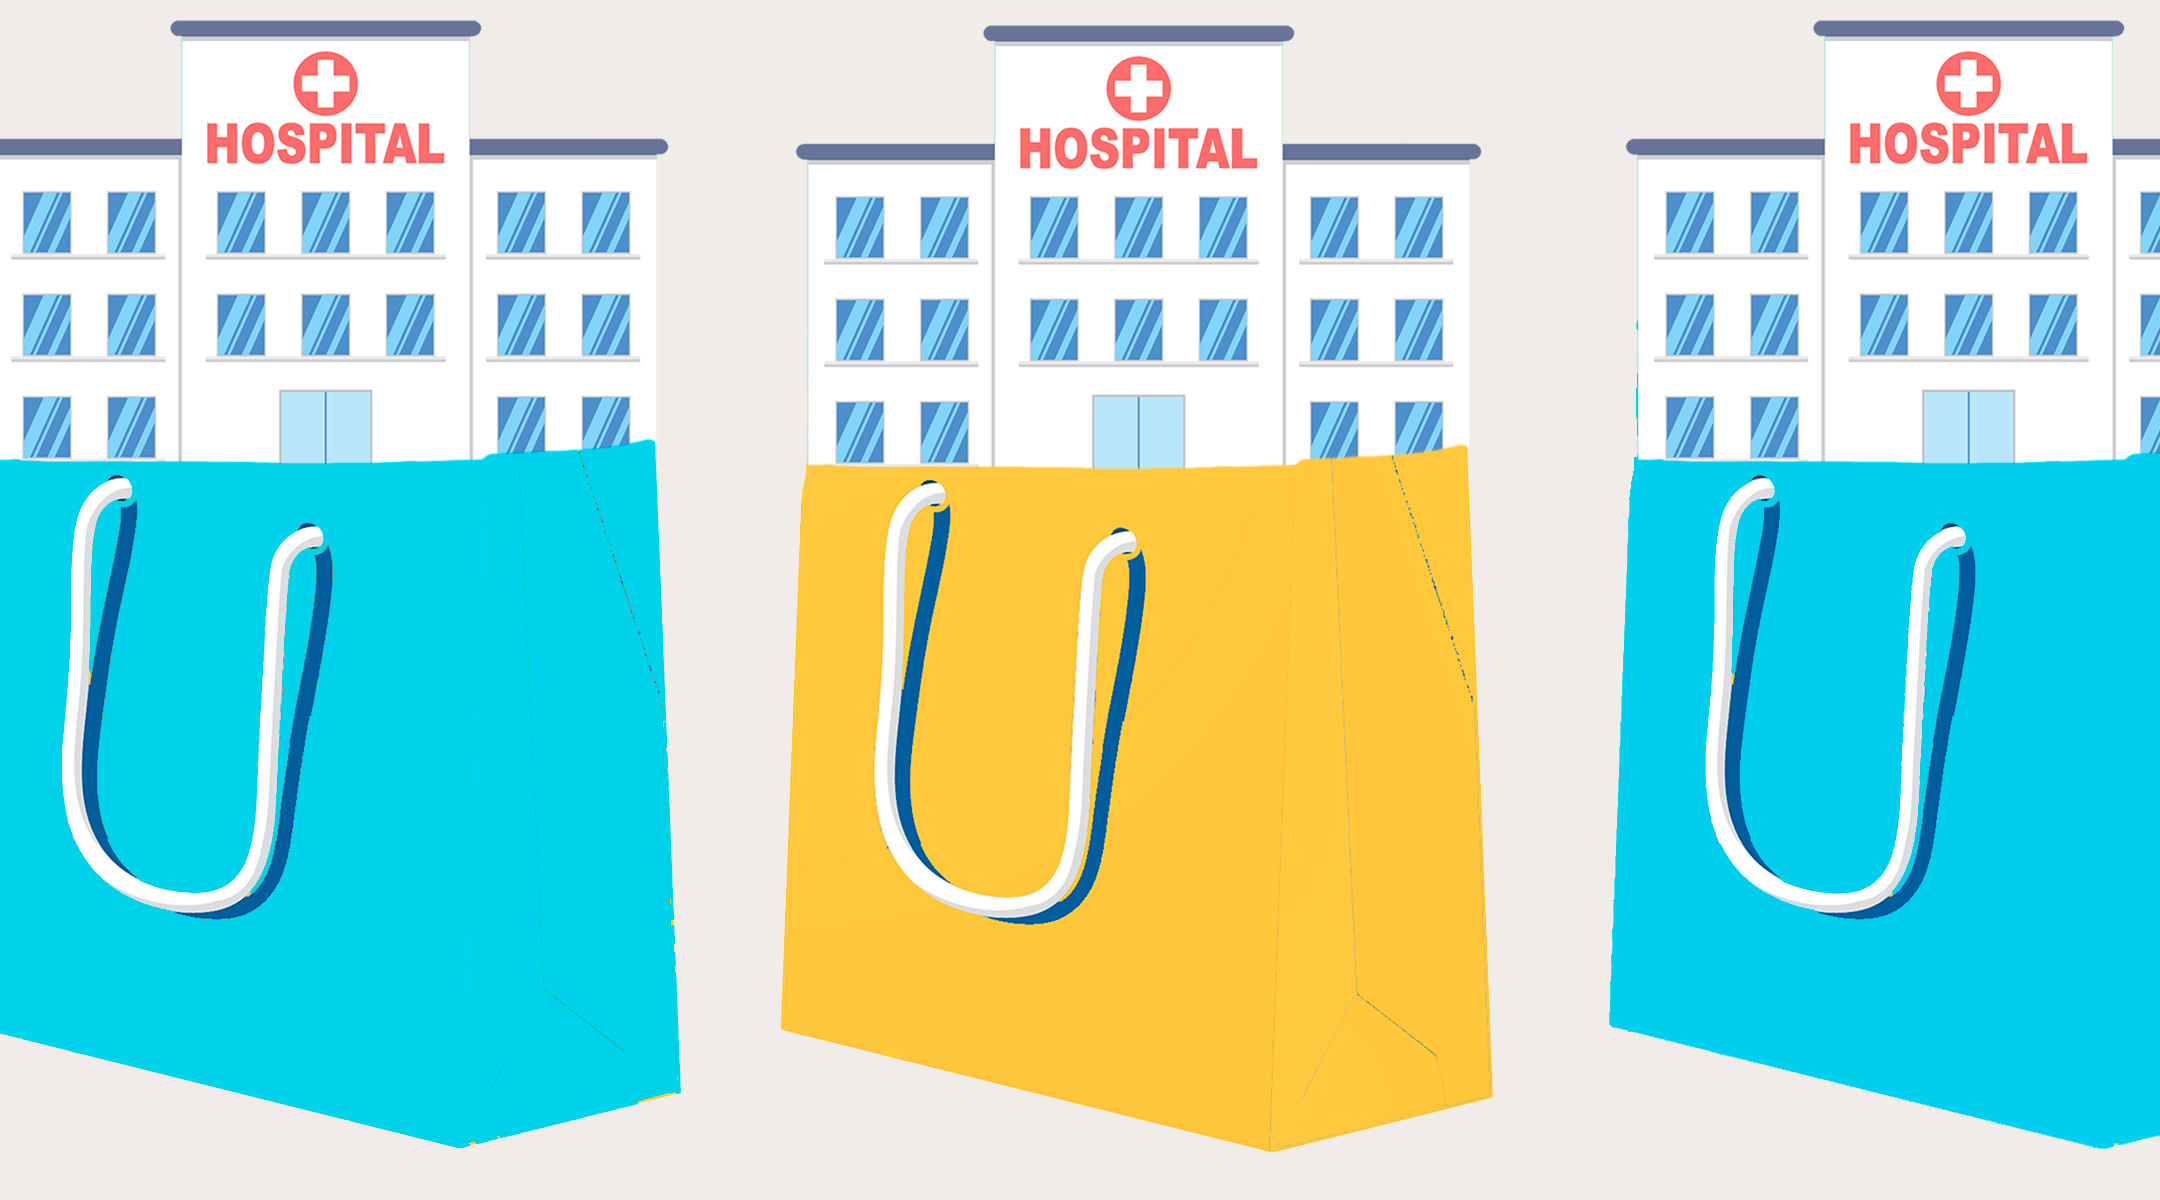 conceptual illustration of hospitals inside shopping bags